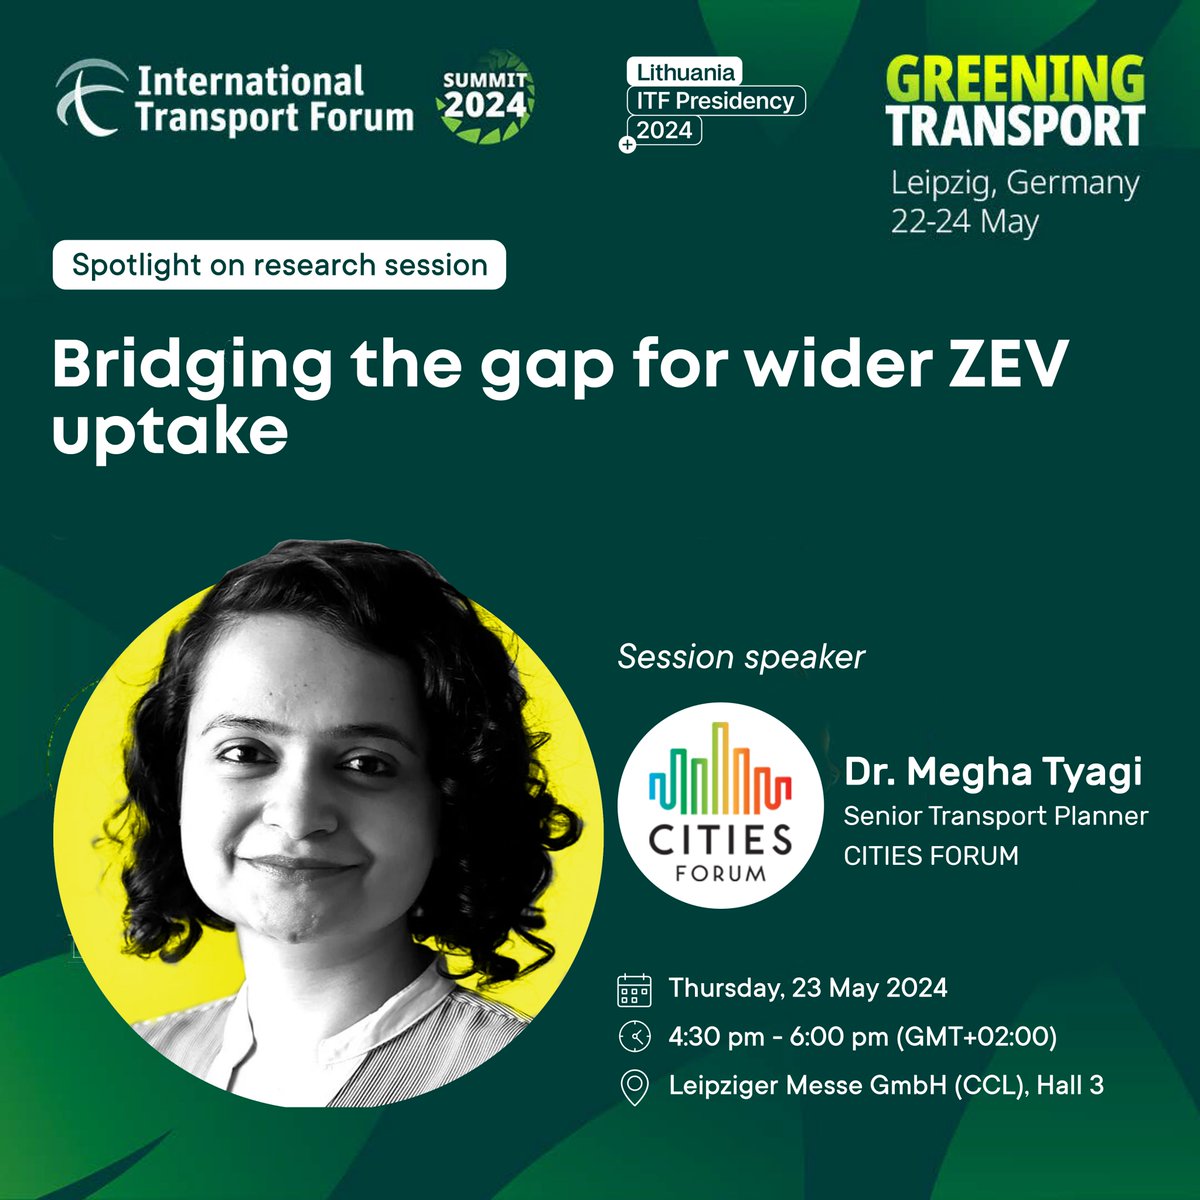 I'm thrilled to speak at the @ITF_Forum 2024  Summit next week, representing @citiesforum_org! If you are attending the summit in #Leipzig, do join my session, and let's discuss more about the future of #EVtransition & #SustainableTransport in #India.